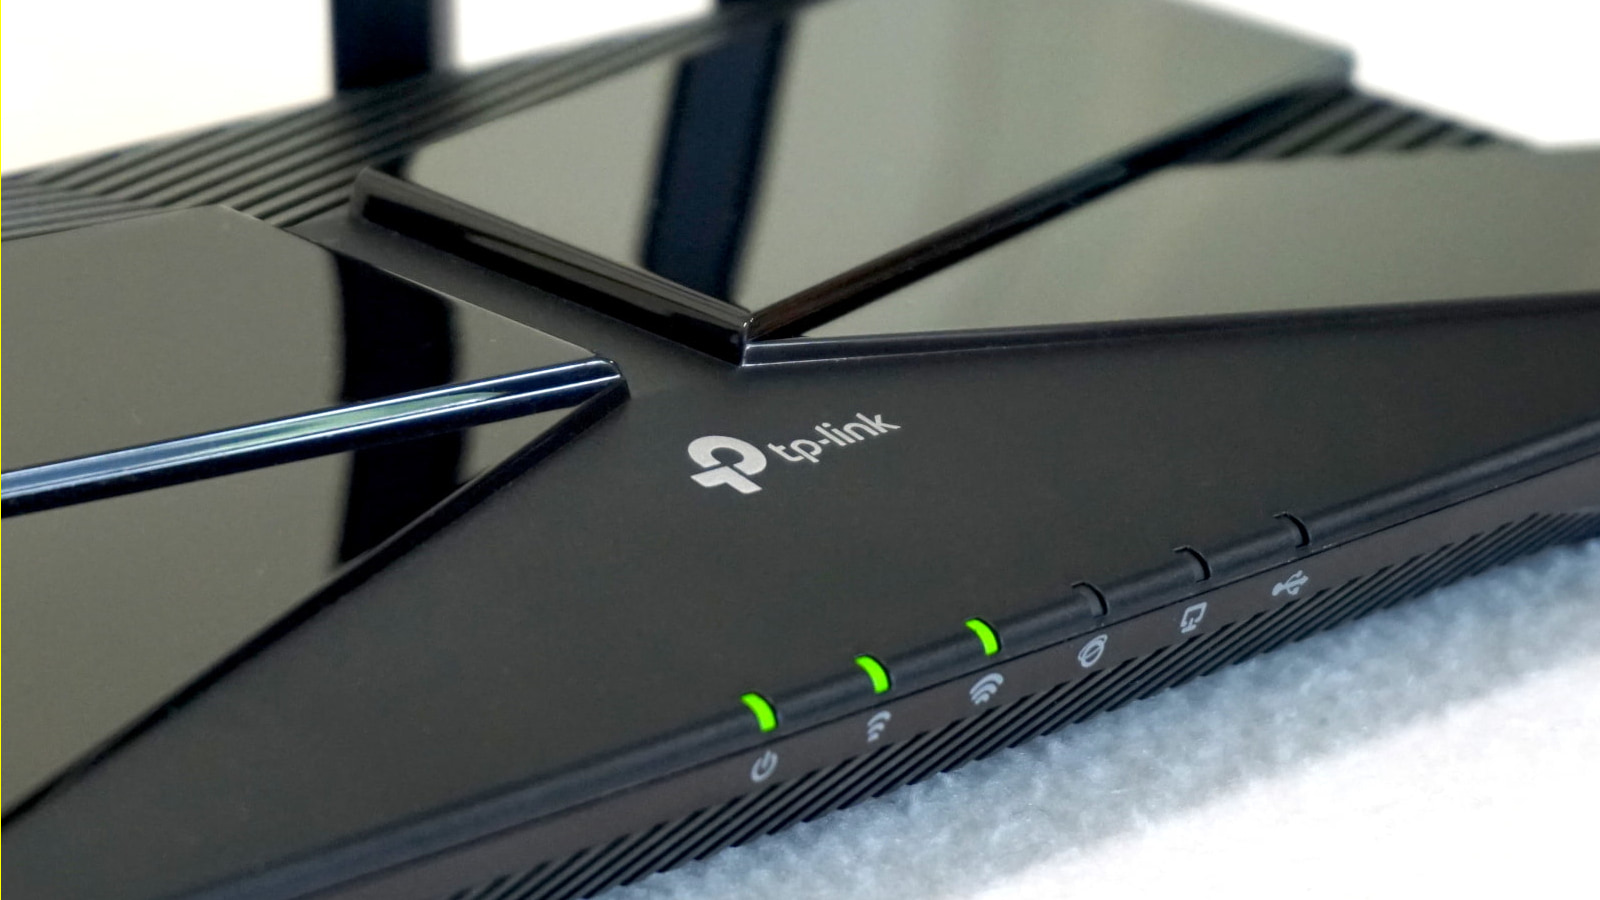 Best Routers for Streaming